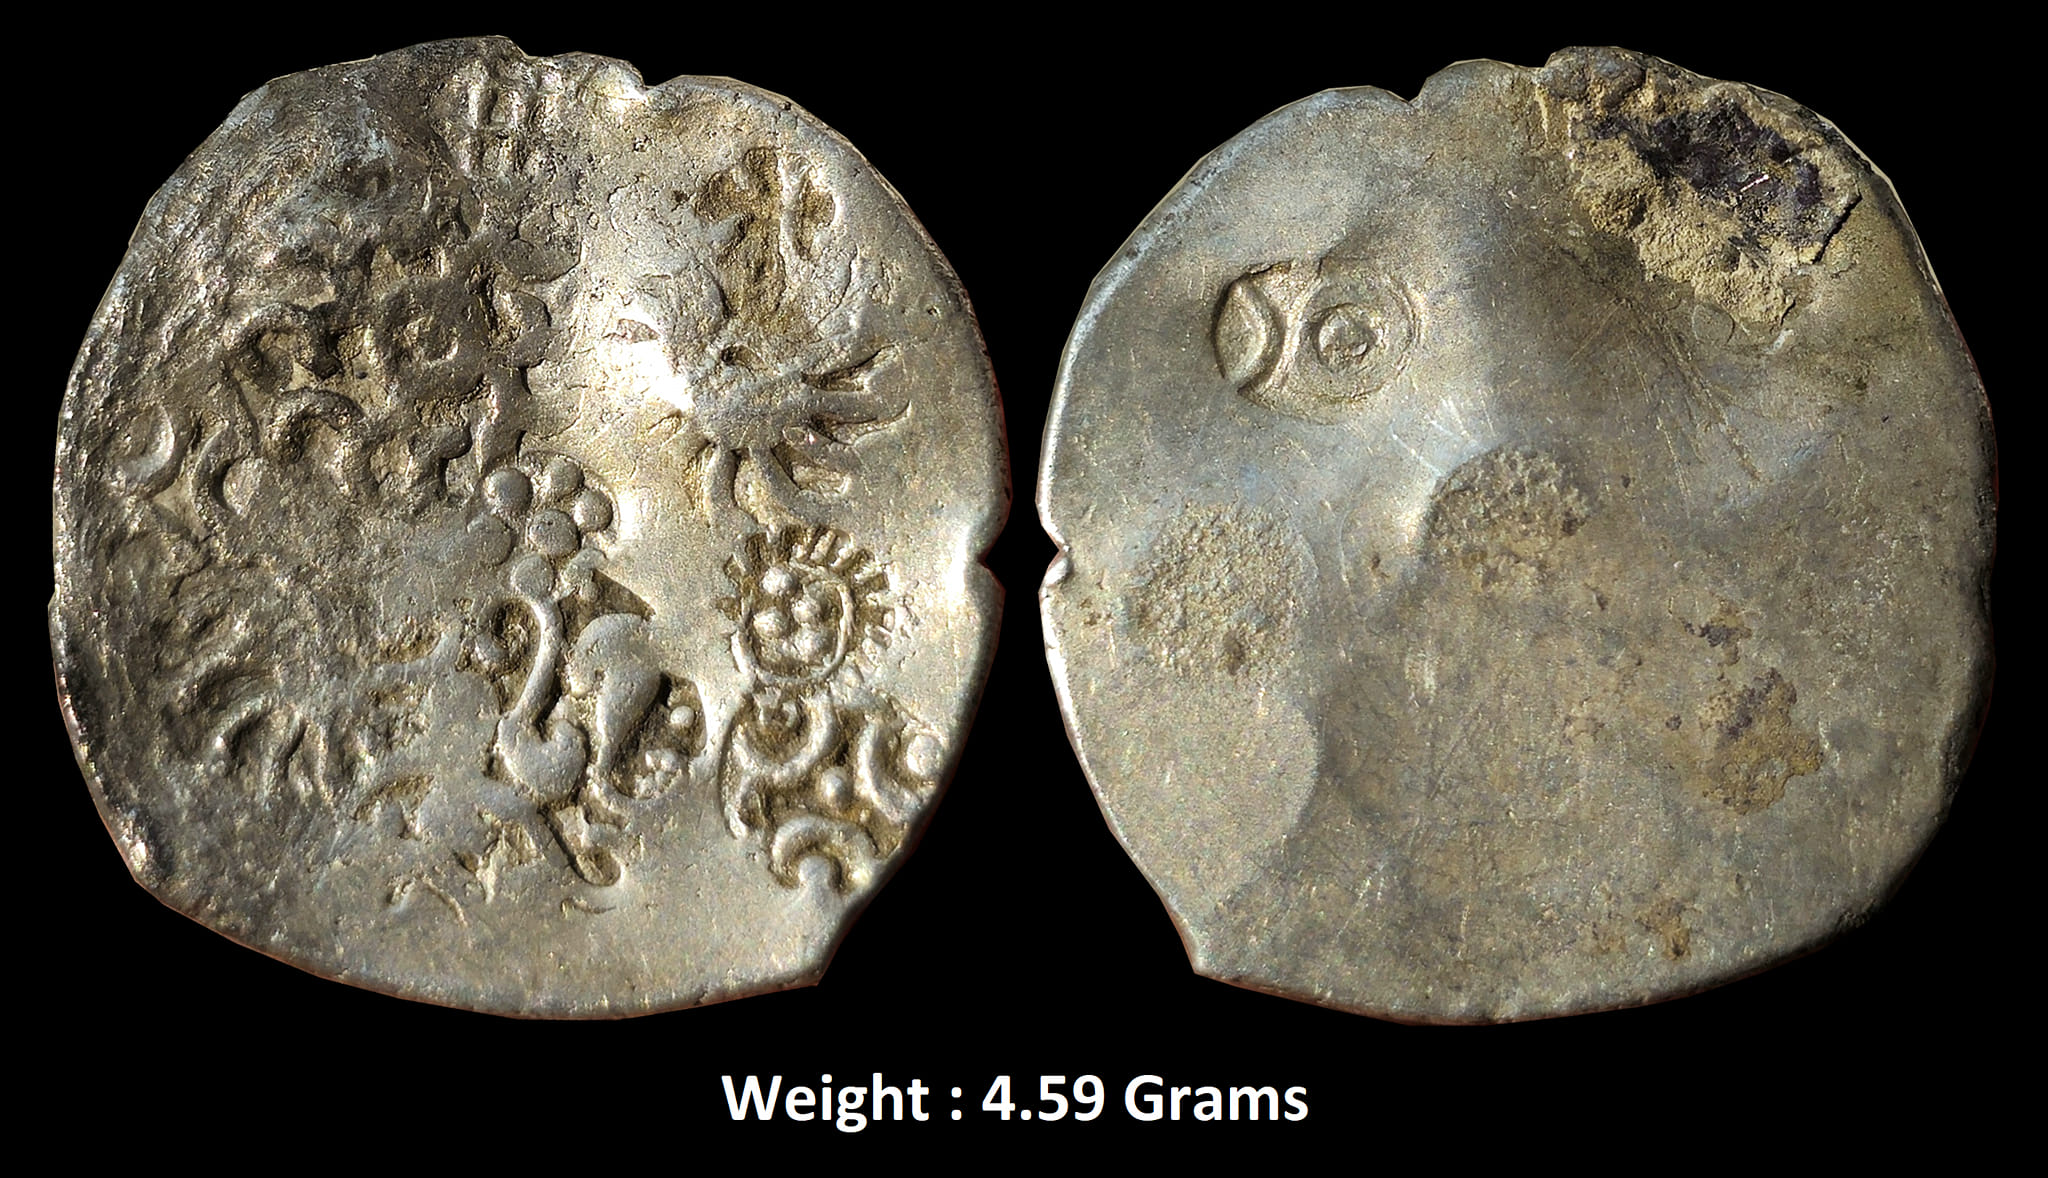 Archaic Punch Marked Coinage,
Attributed to Kashi Janapada, Very RARE Silver Vimshatika,
Four major geometric marks stamped across with several small bankers’ marks
Weight : 4.59 Grams (Rajgor Series 55).